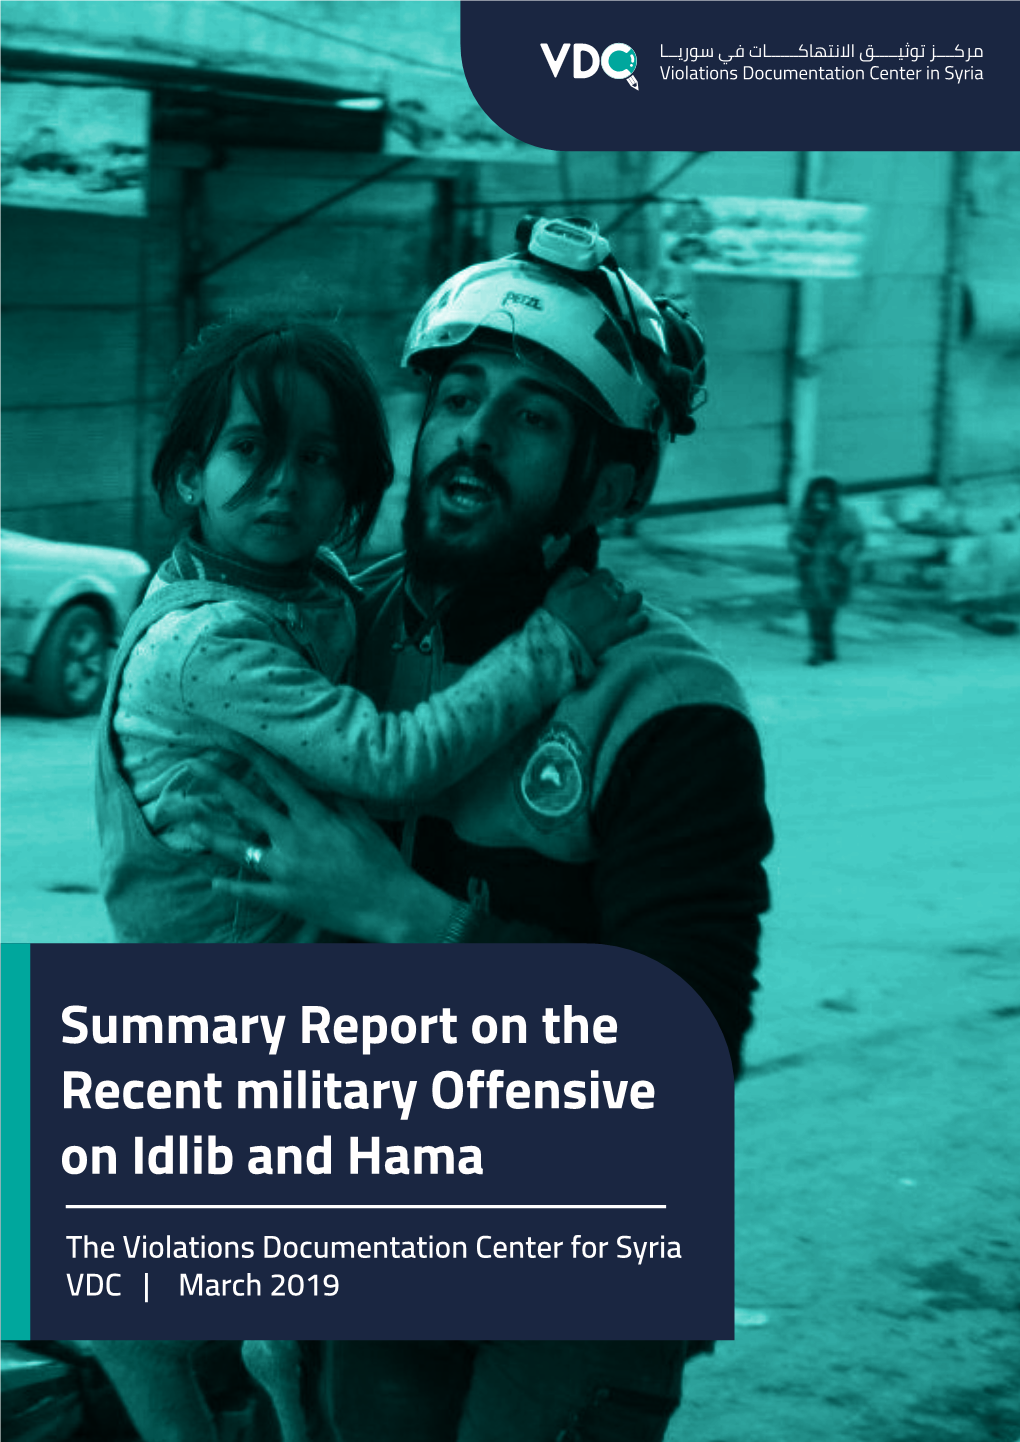 Summary Report on the Recent Military Offensive on Idlib and Hama